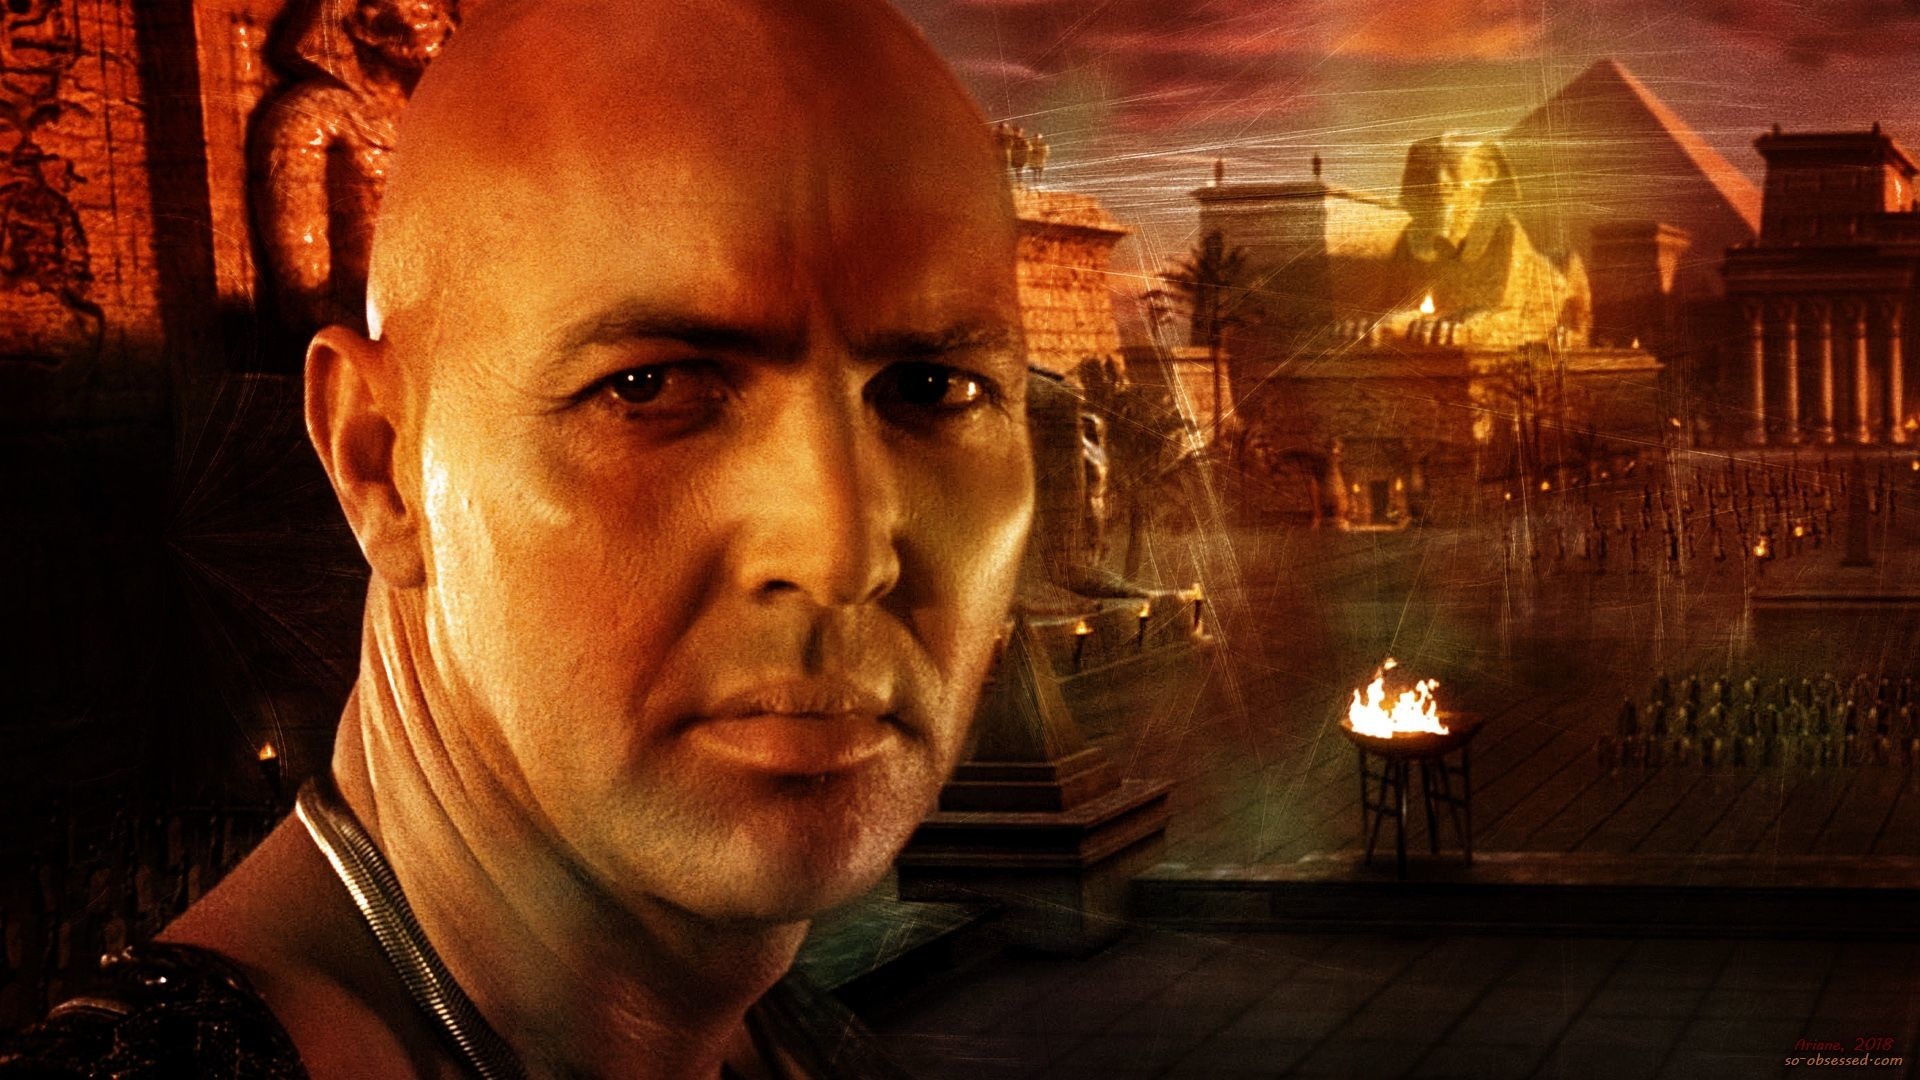 Arnold Vosloo, Creepy mummy, Haunting images, Mysterious character, 1920x1080 Full HD Desktop